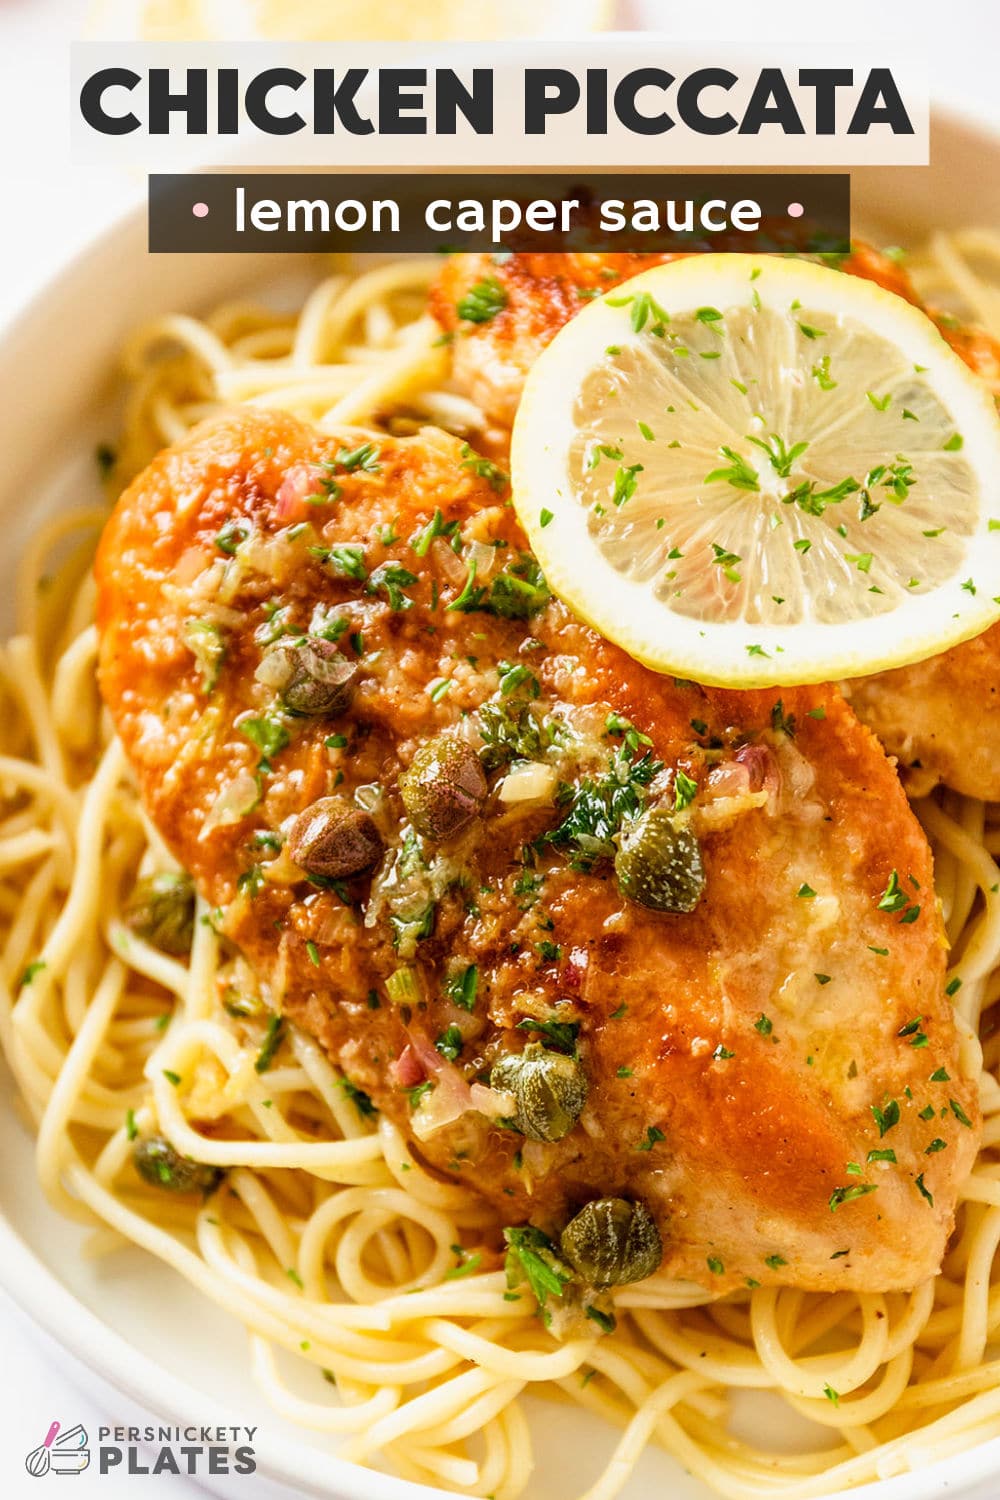 This zesty lemon chicken piccata with pasta is a dinner that is bursting with so much flavor, your family will ask what you’re cooking before it’s ready. The juicy chicken is coated with crispy parmesan, and topped with a tangy lemon caper sauce. Then, it’s all served on a bed of pasta. It’s basically the perfect family dinner! | www.persnicketyplates.comThis zesty lemon chicken piccata with pasta is a dinner that is bursting with so much flavor, your family will ask what you’re cooking before it’s ready. The juicy chicken is coated with crispy parmesan, and topped with a tangy lemon caper sauce. Then, it’s all served on a bed of pasta. It’s basically the perfect family dinner! | www.persnicketyplates.com